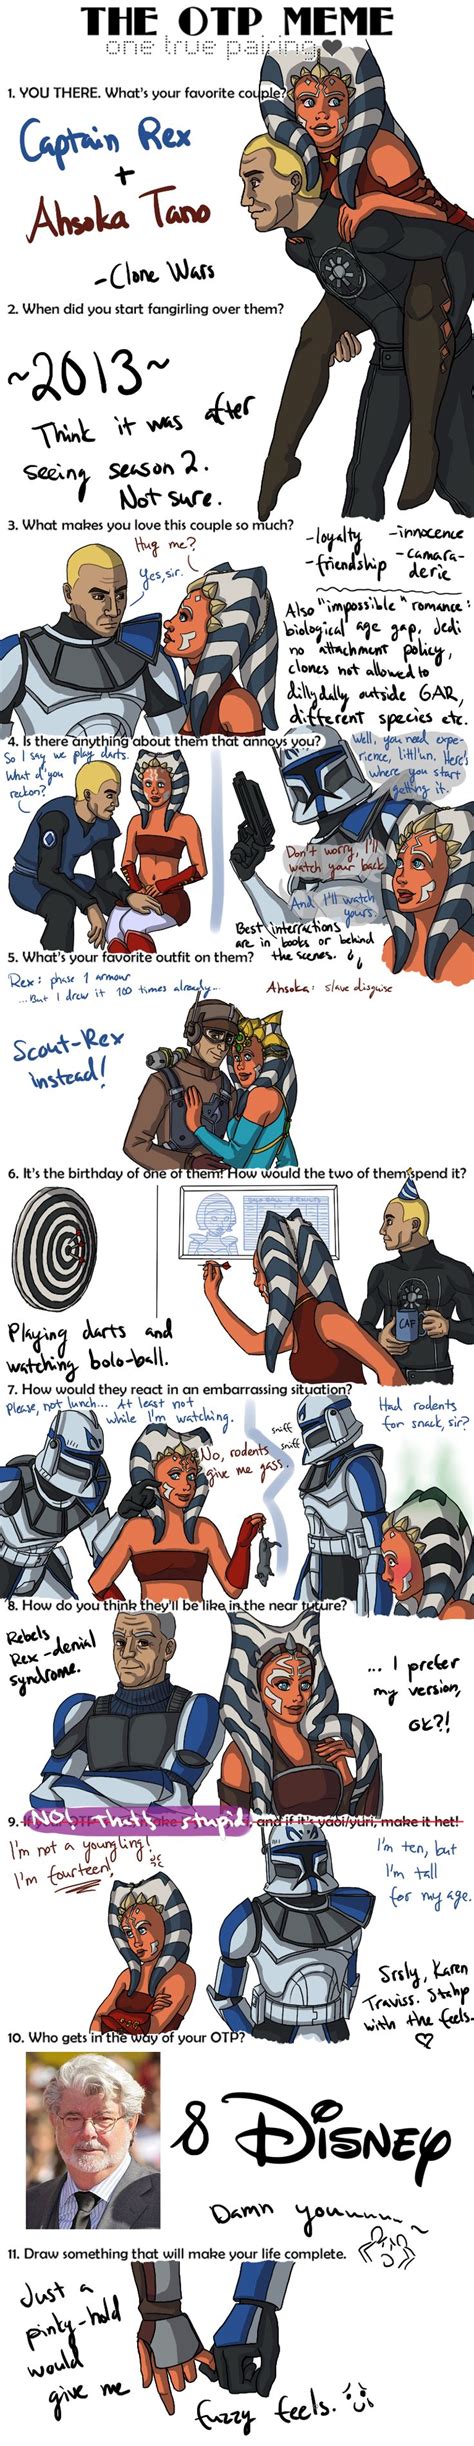 28 Best Images About Ahsoka And Rex On Pinterest Pistols